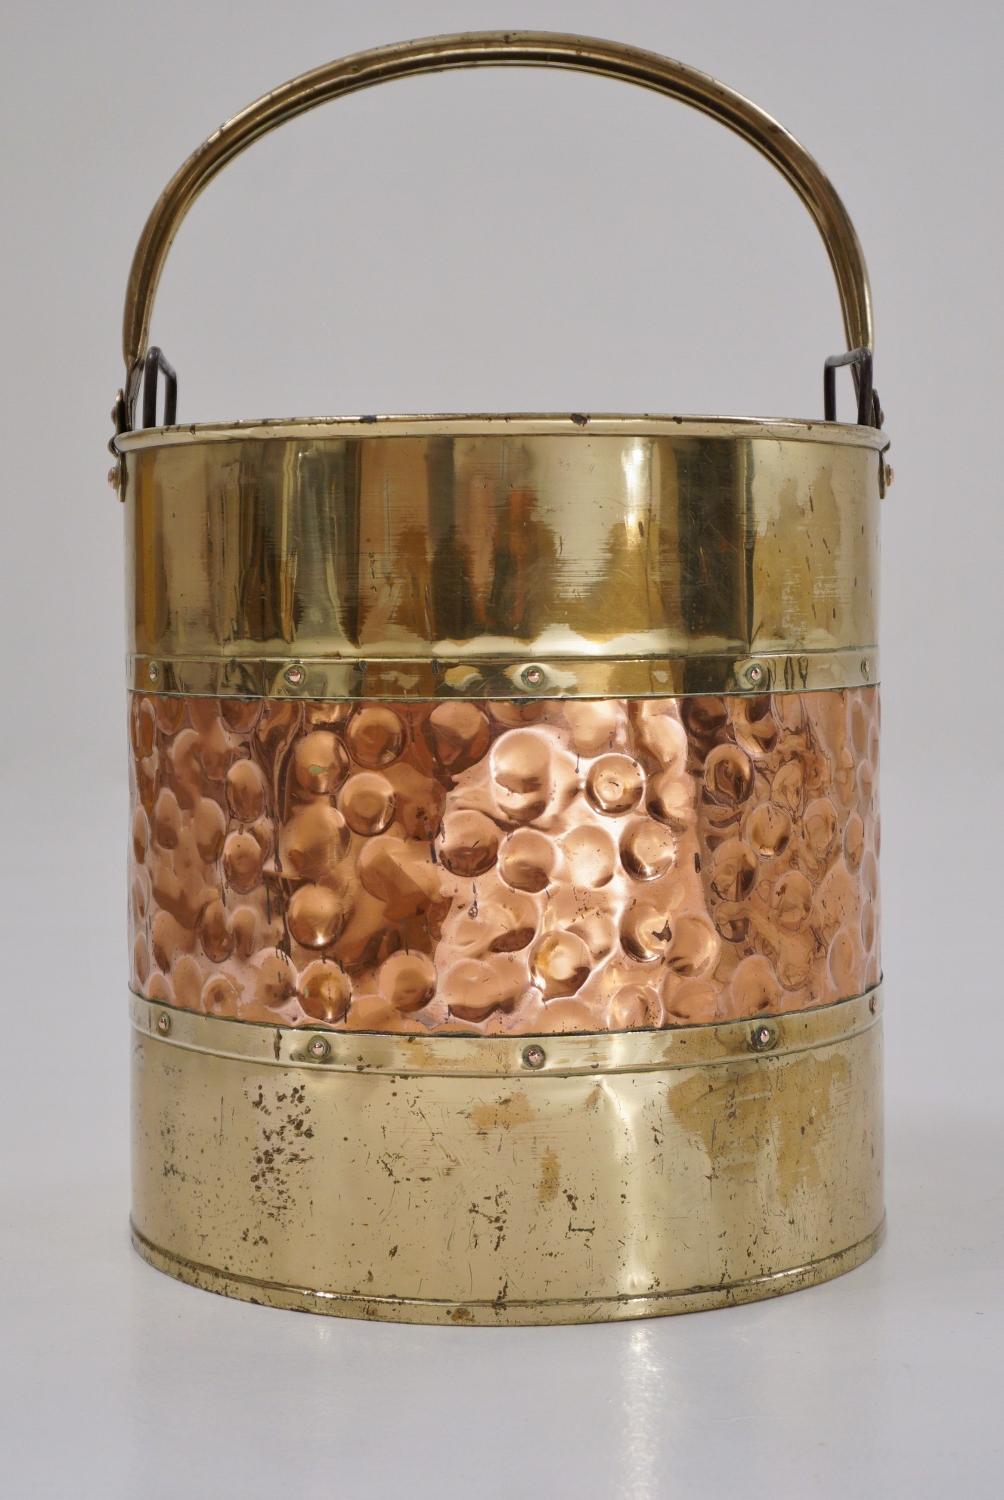 British Antique Brass Bucket/Bin 'Coal Scuttle' with Copper Banding, circa 1900s English For Sale